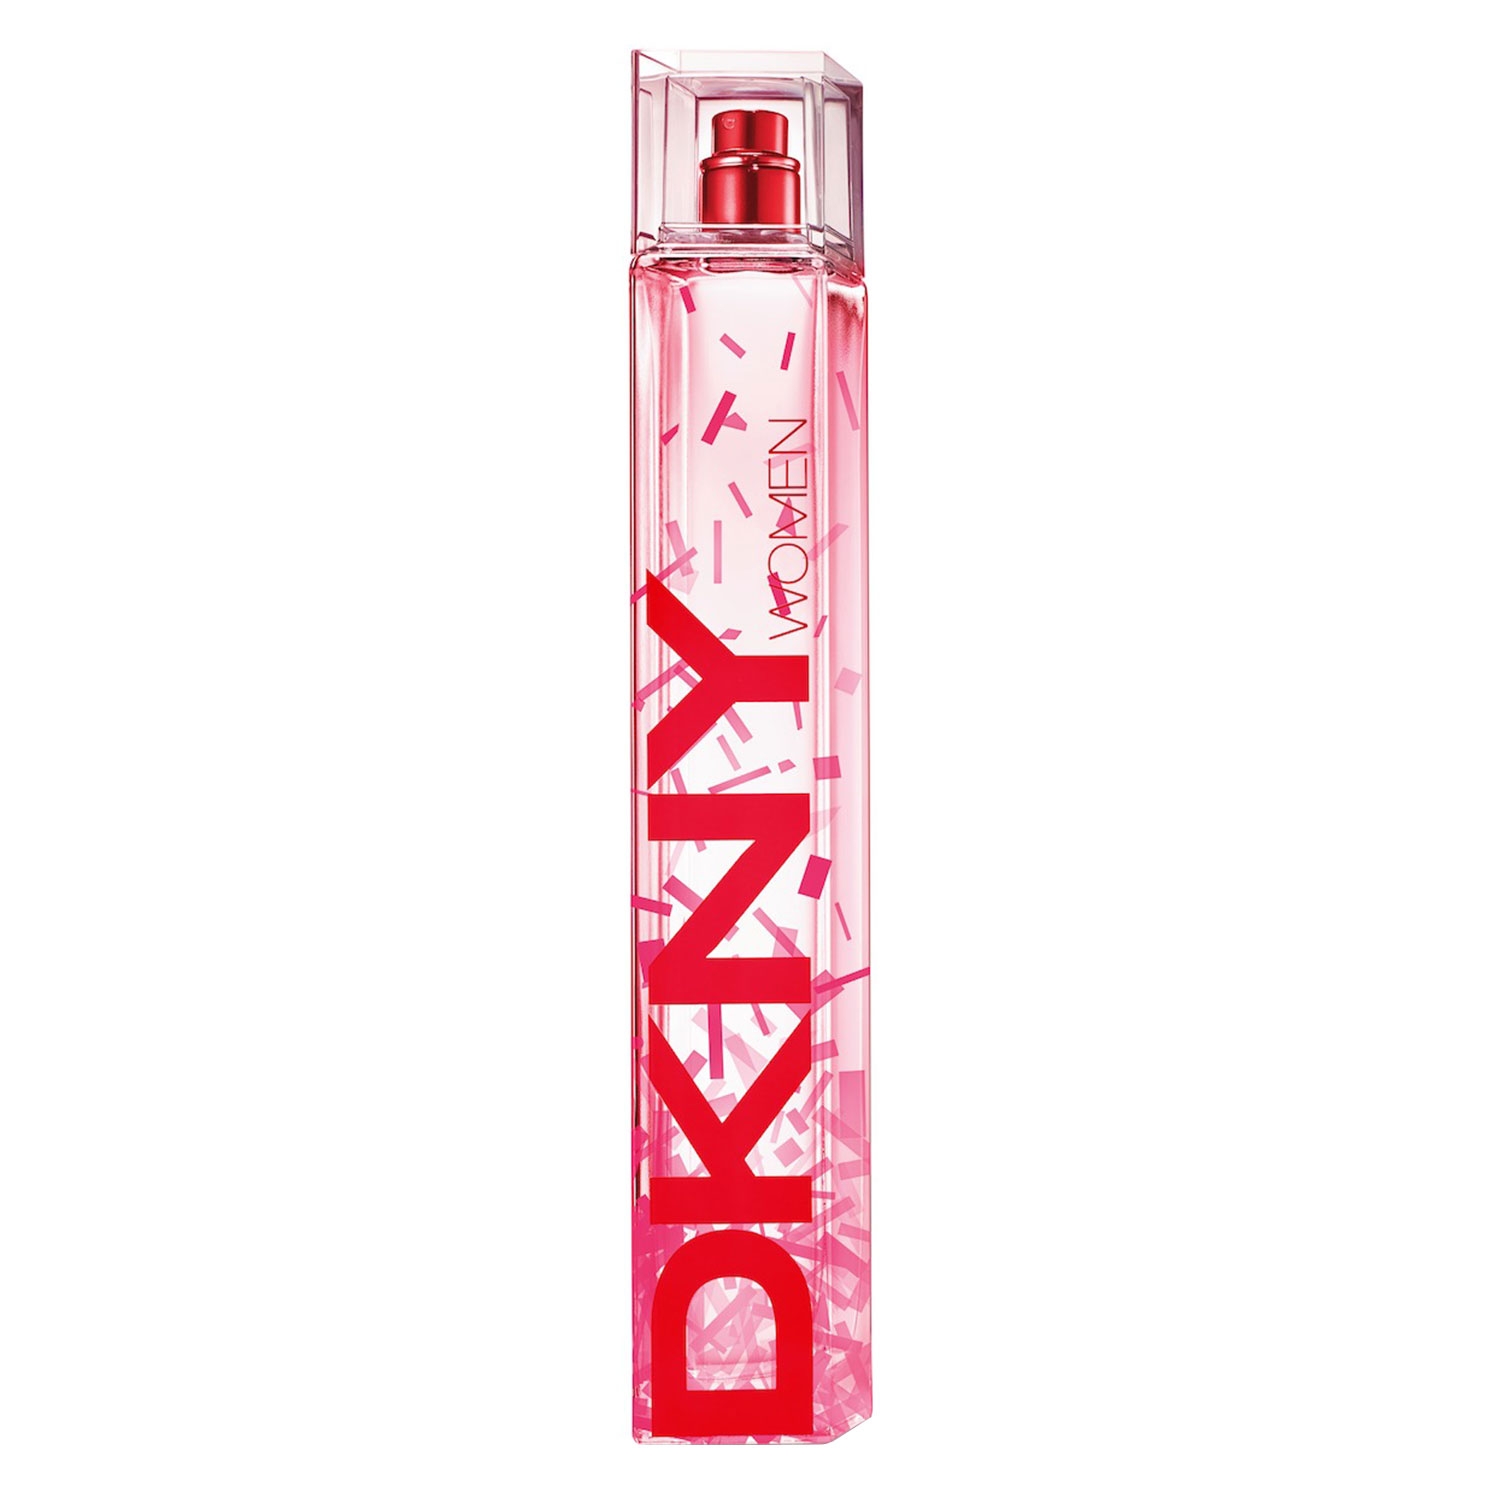 Product image from DKNY Women - Original Fall Woman Limited Edition